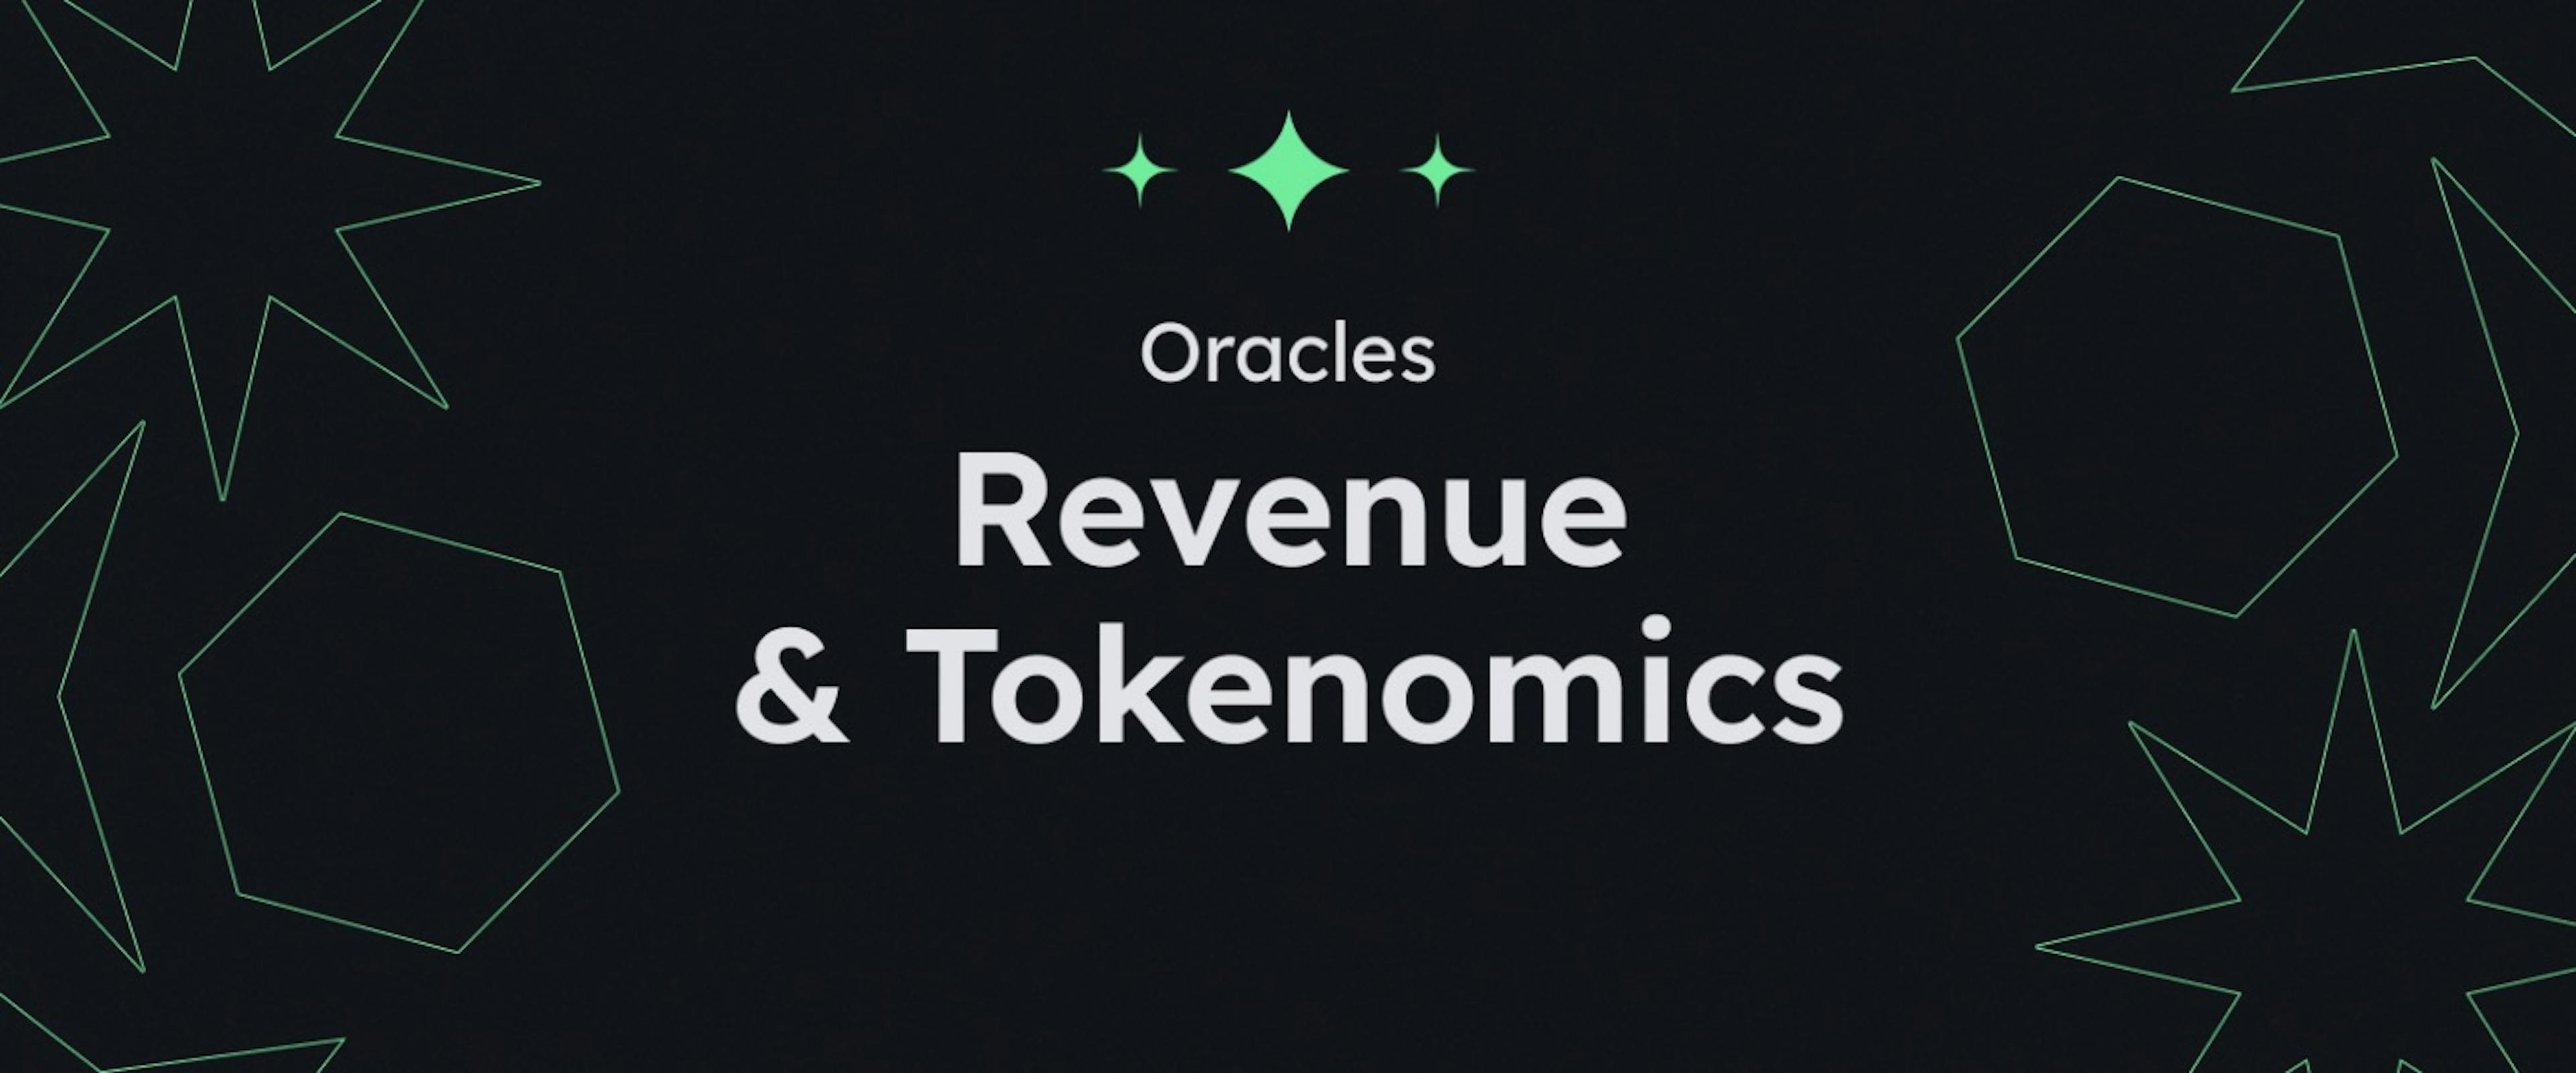 featured image - Oracles: Revenue and Tokenomics